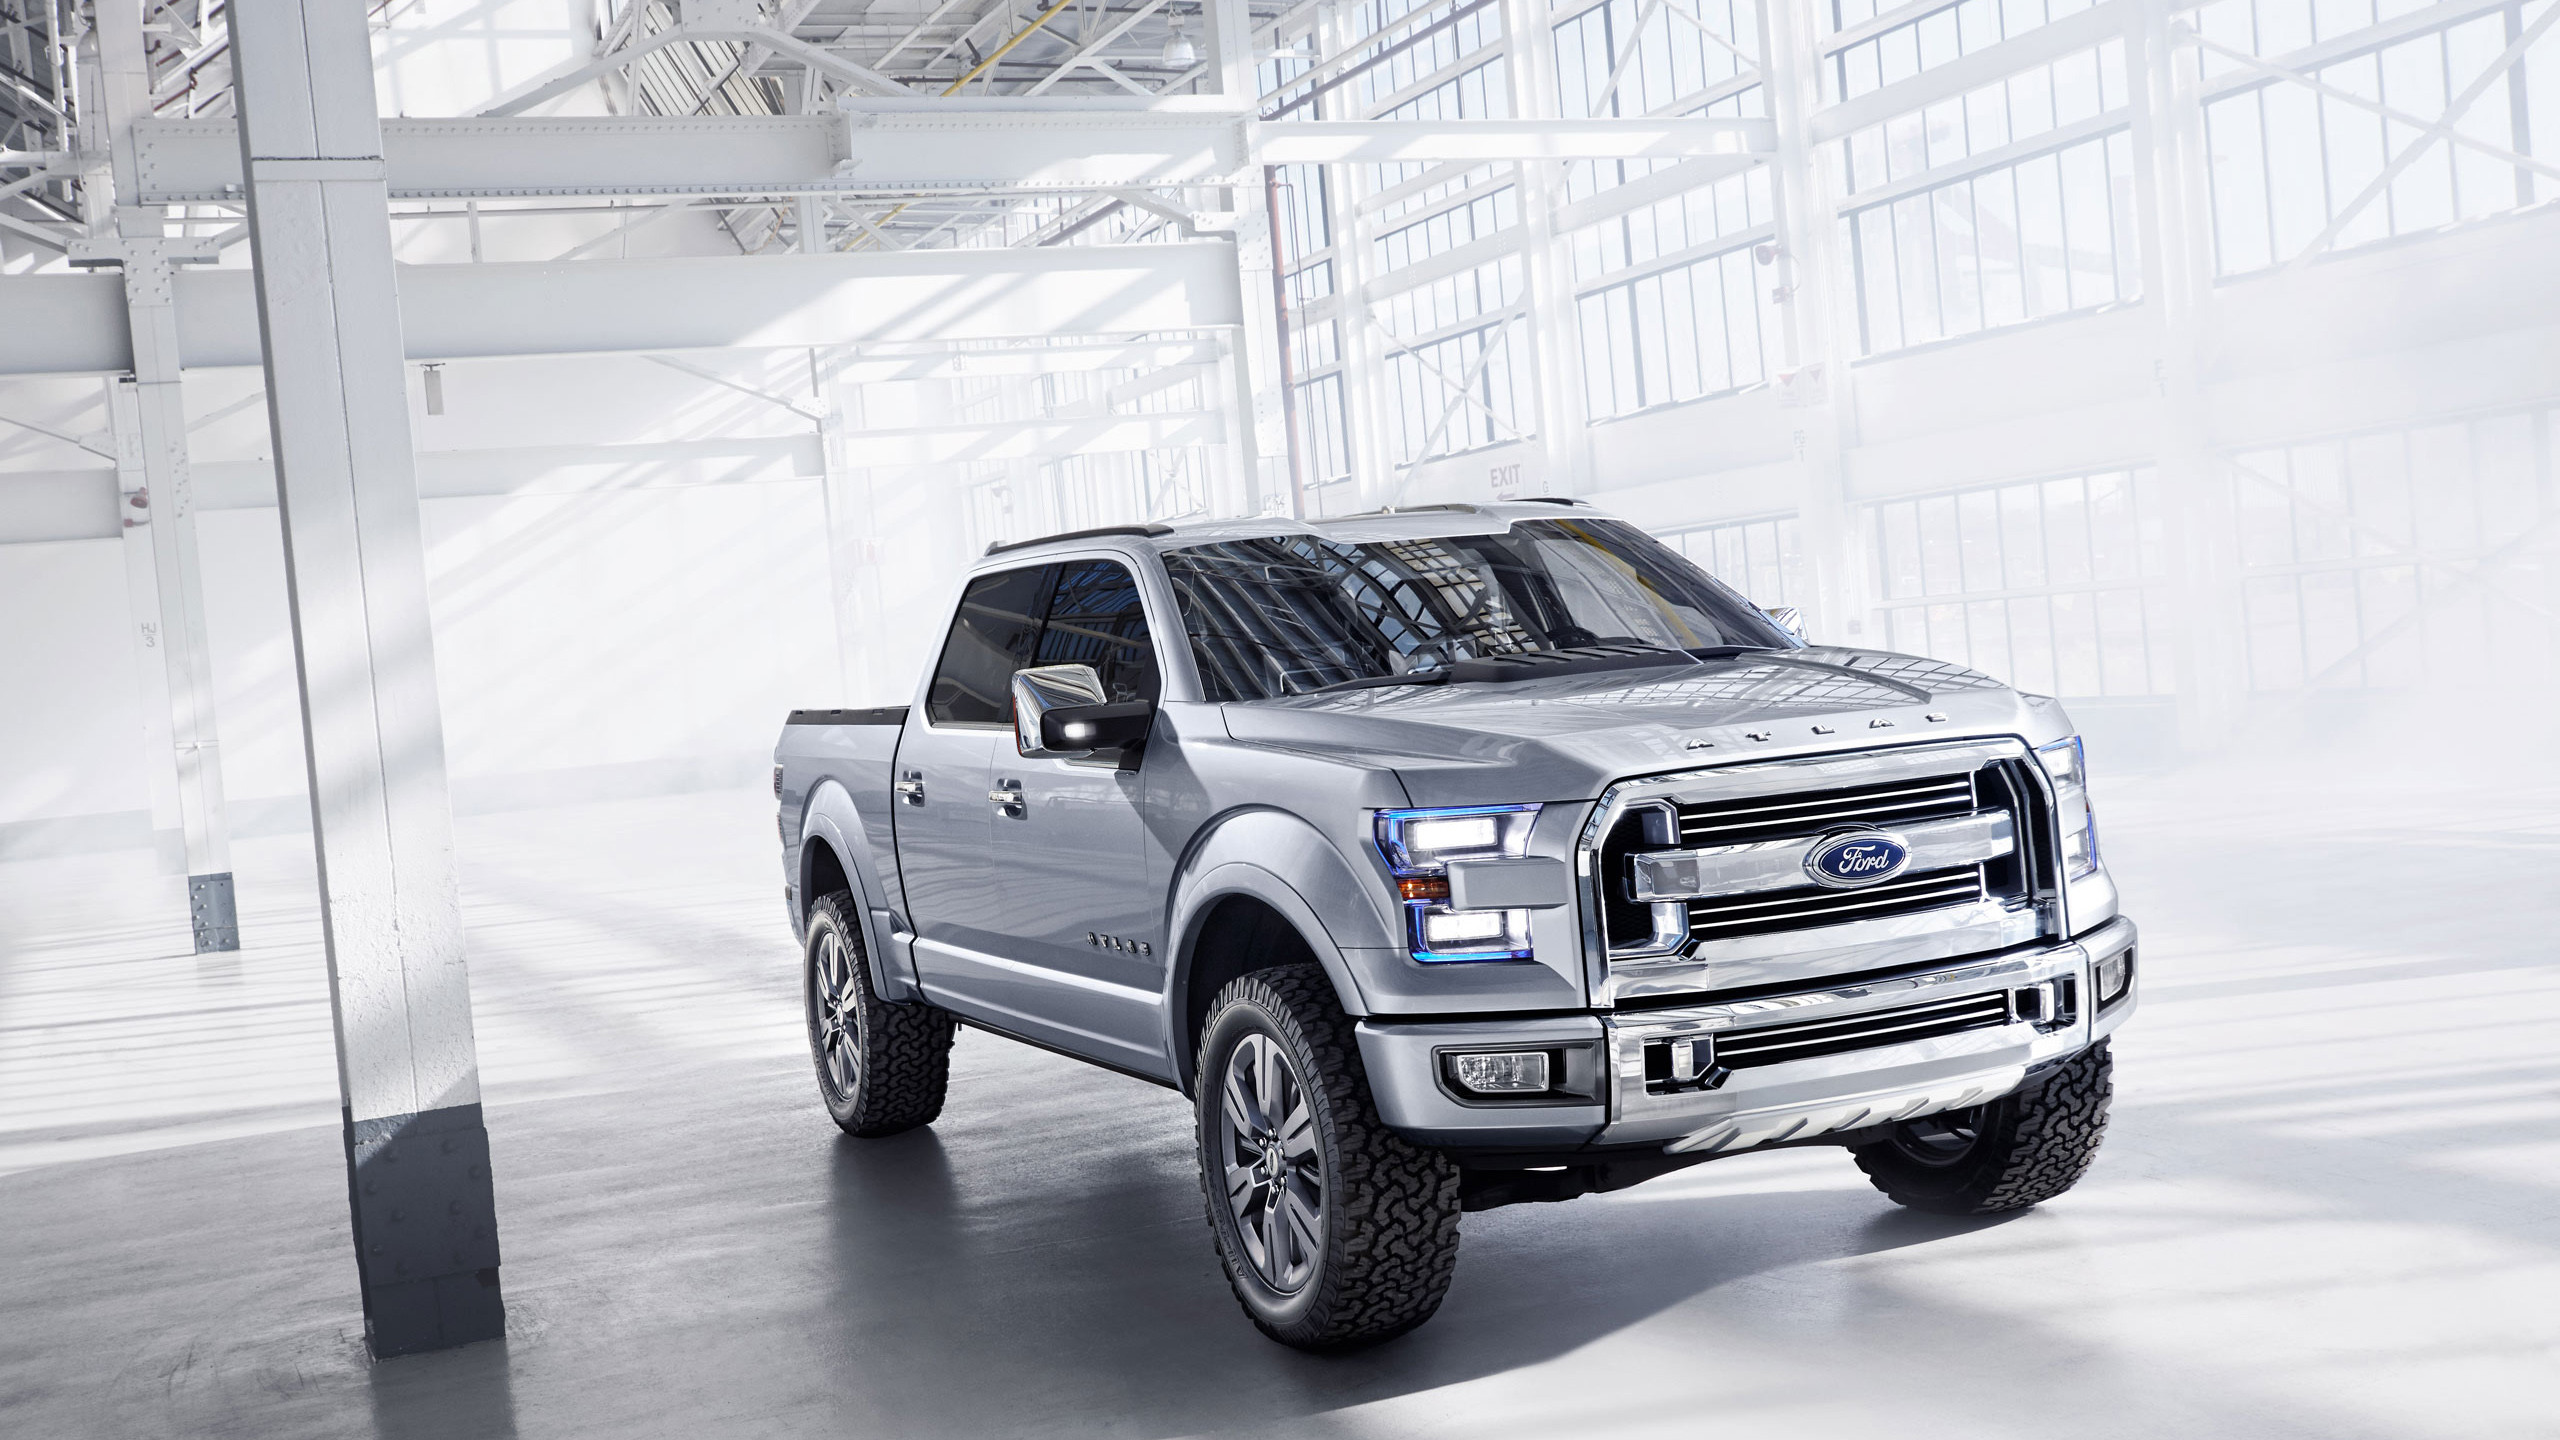 2560x1440 ford truck wallpaper background 20766